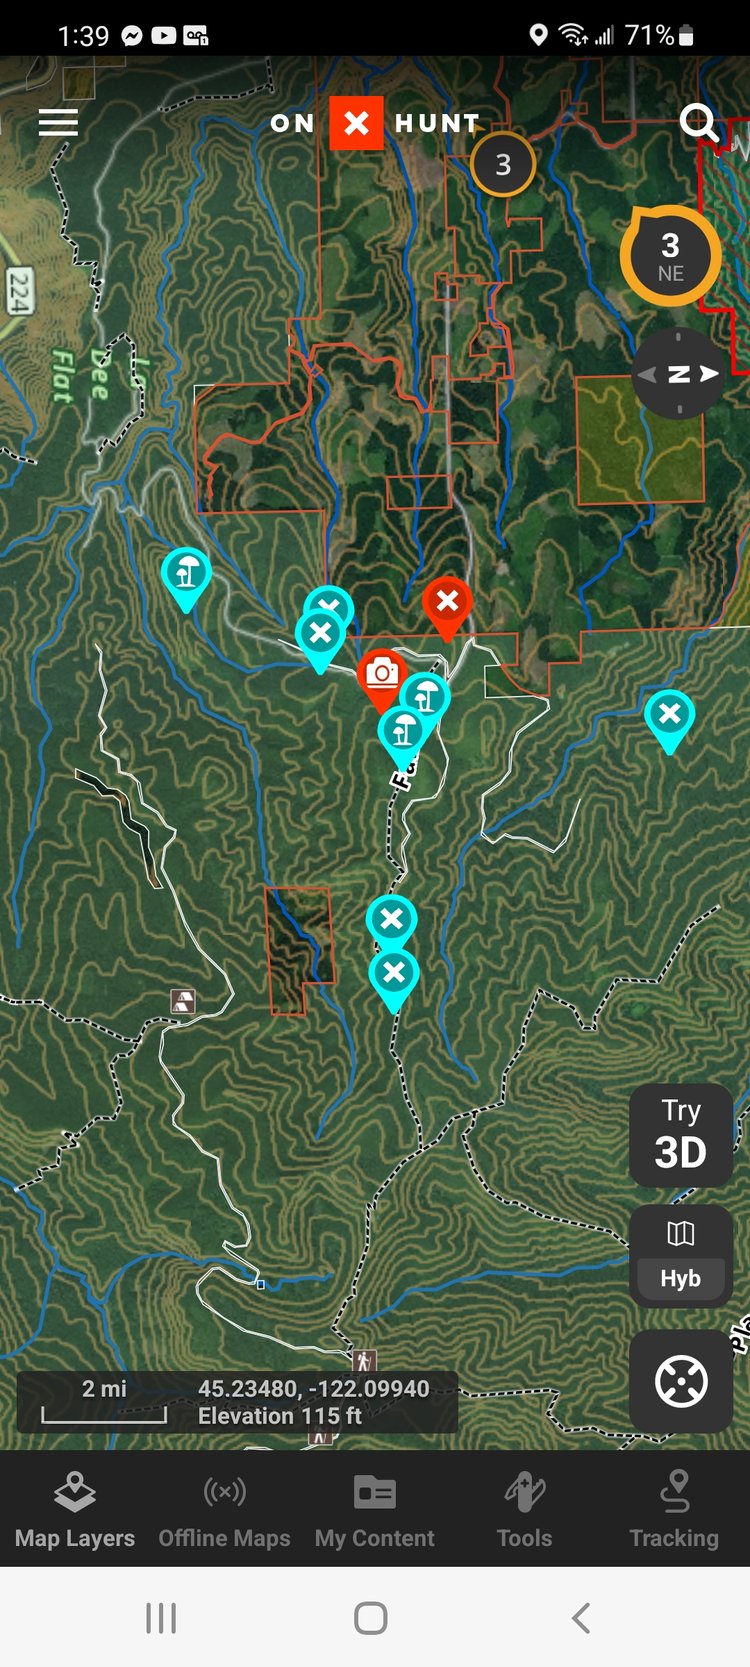 OnX Hunt photo showing pins of locations